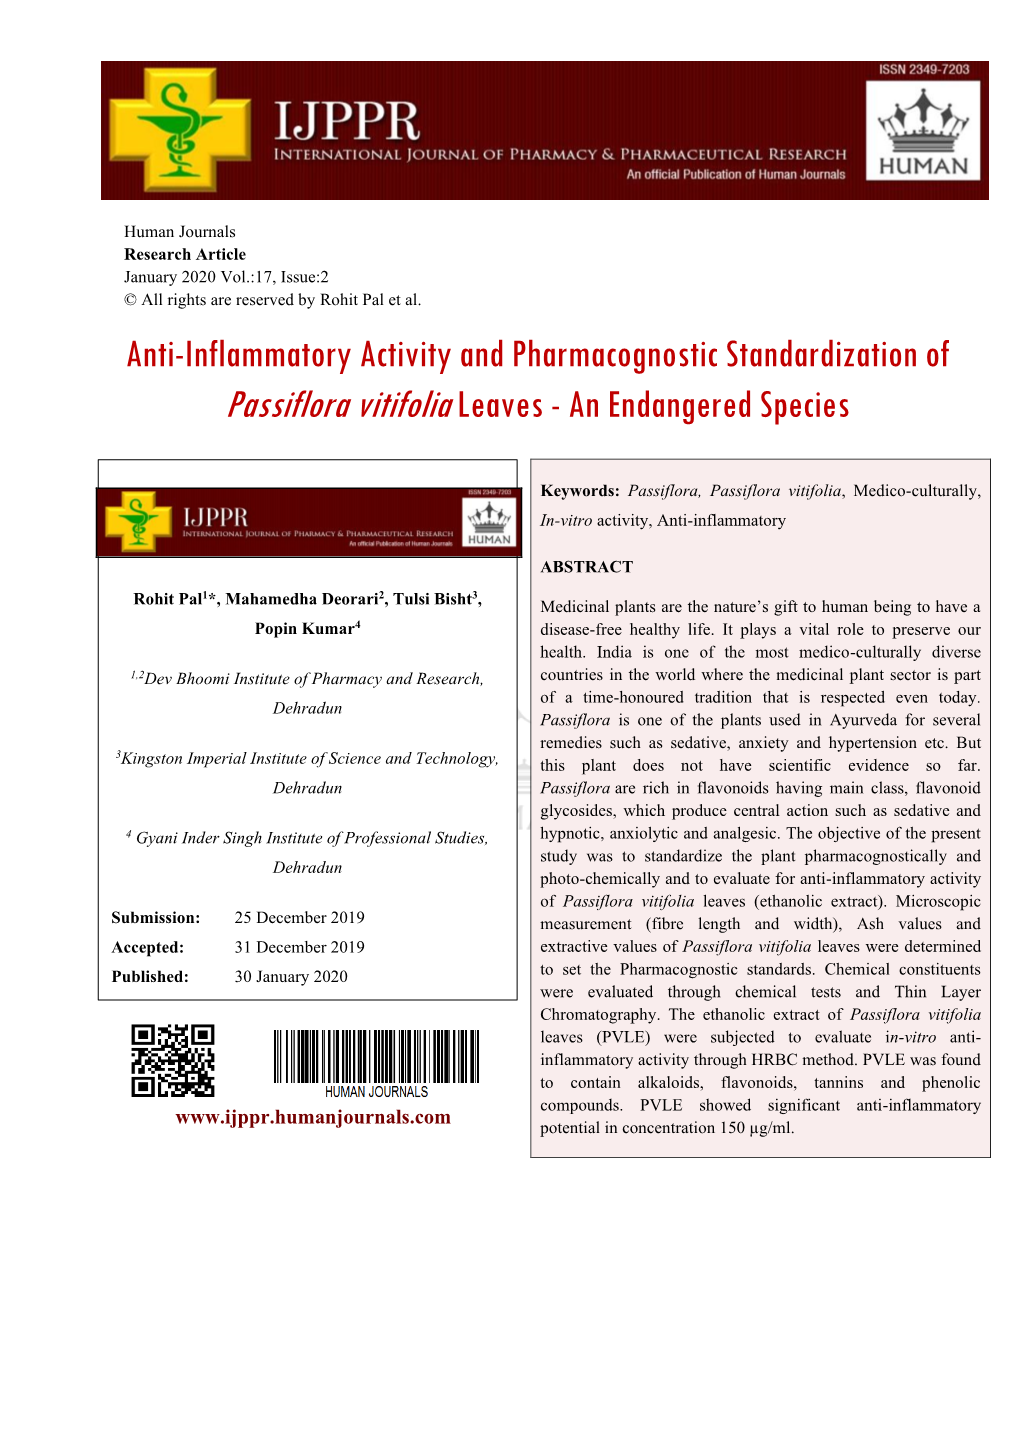 Anti-Inflammatory Activity and Pharmacognostic Standardization of Passiflora Vitifolia Leaves - an Endangered Species